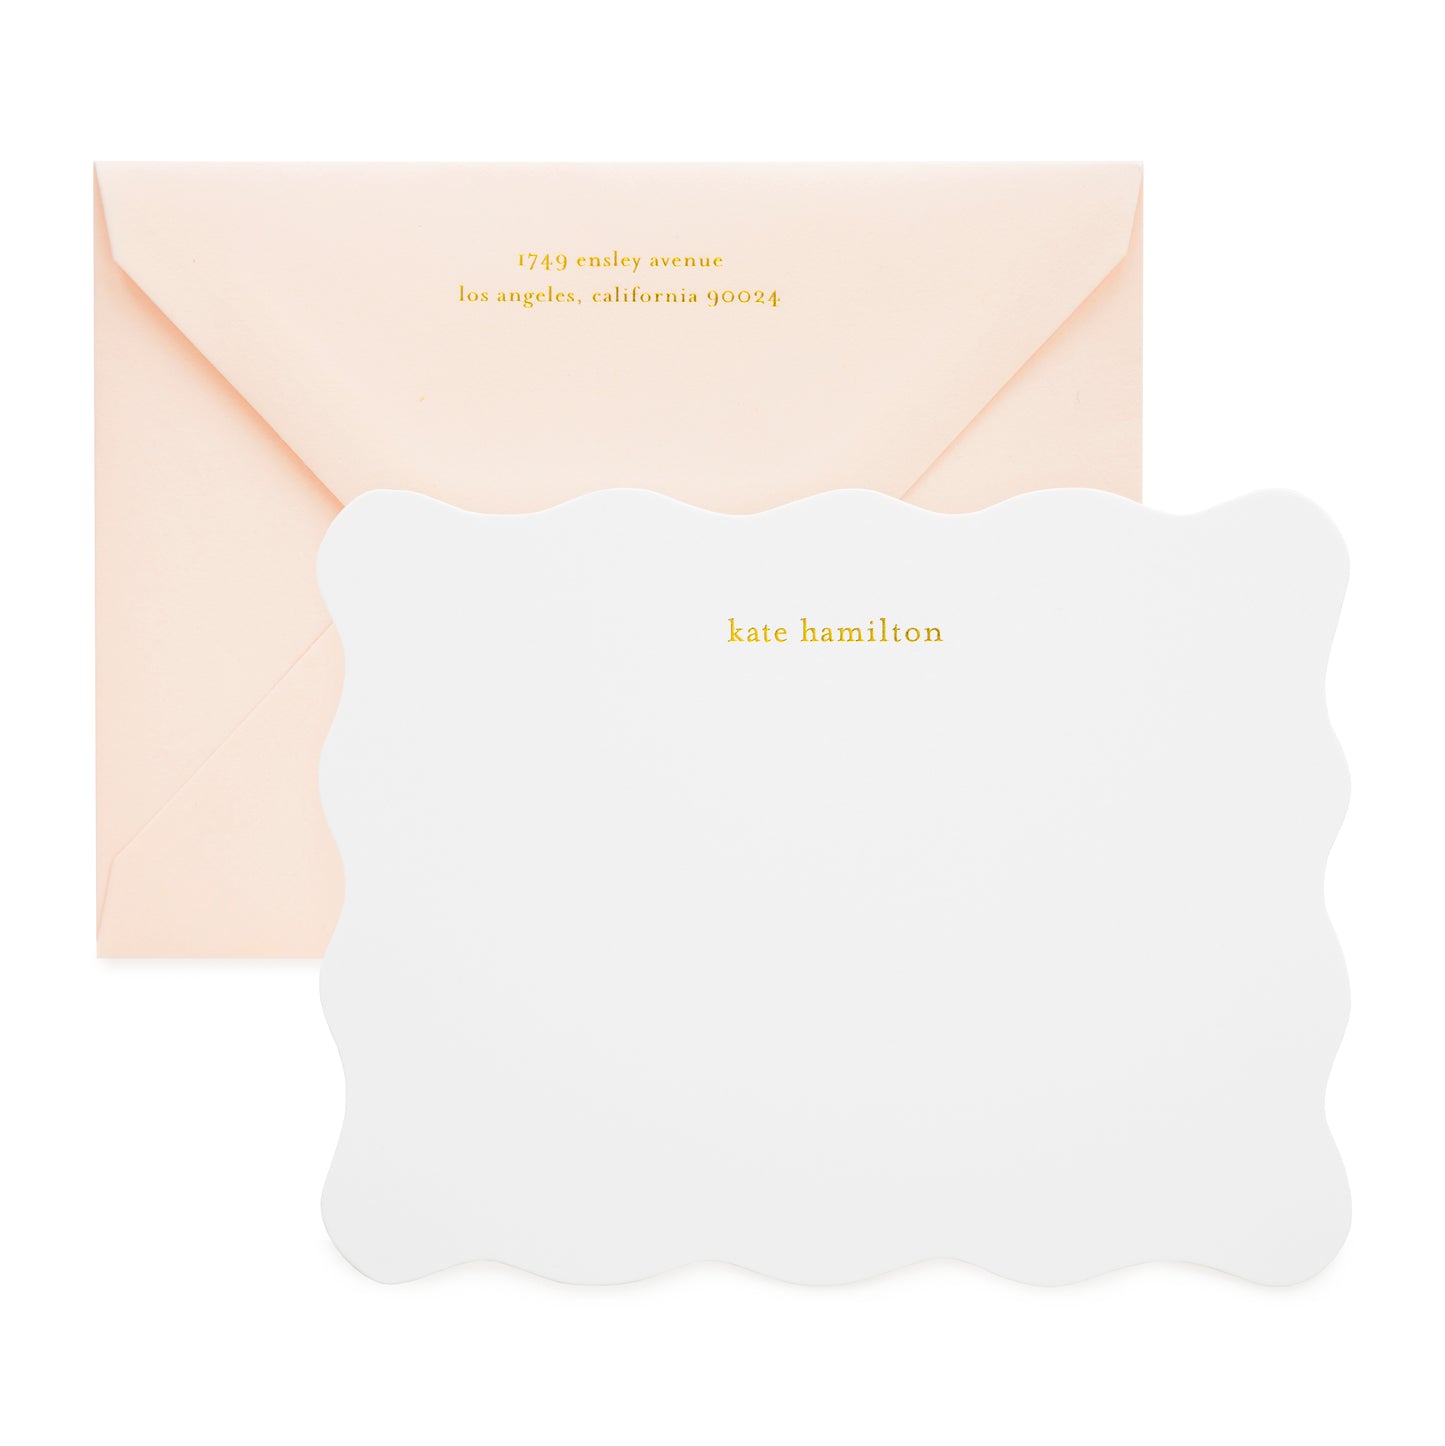 White scalloped custom stationery notecard foil printed with kate hamilton and paired with a pale pink envelope